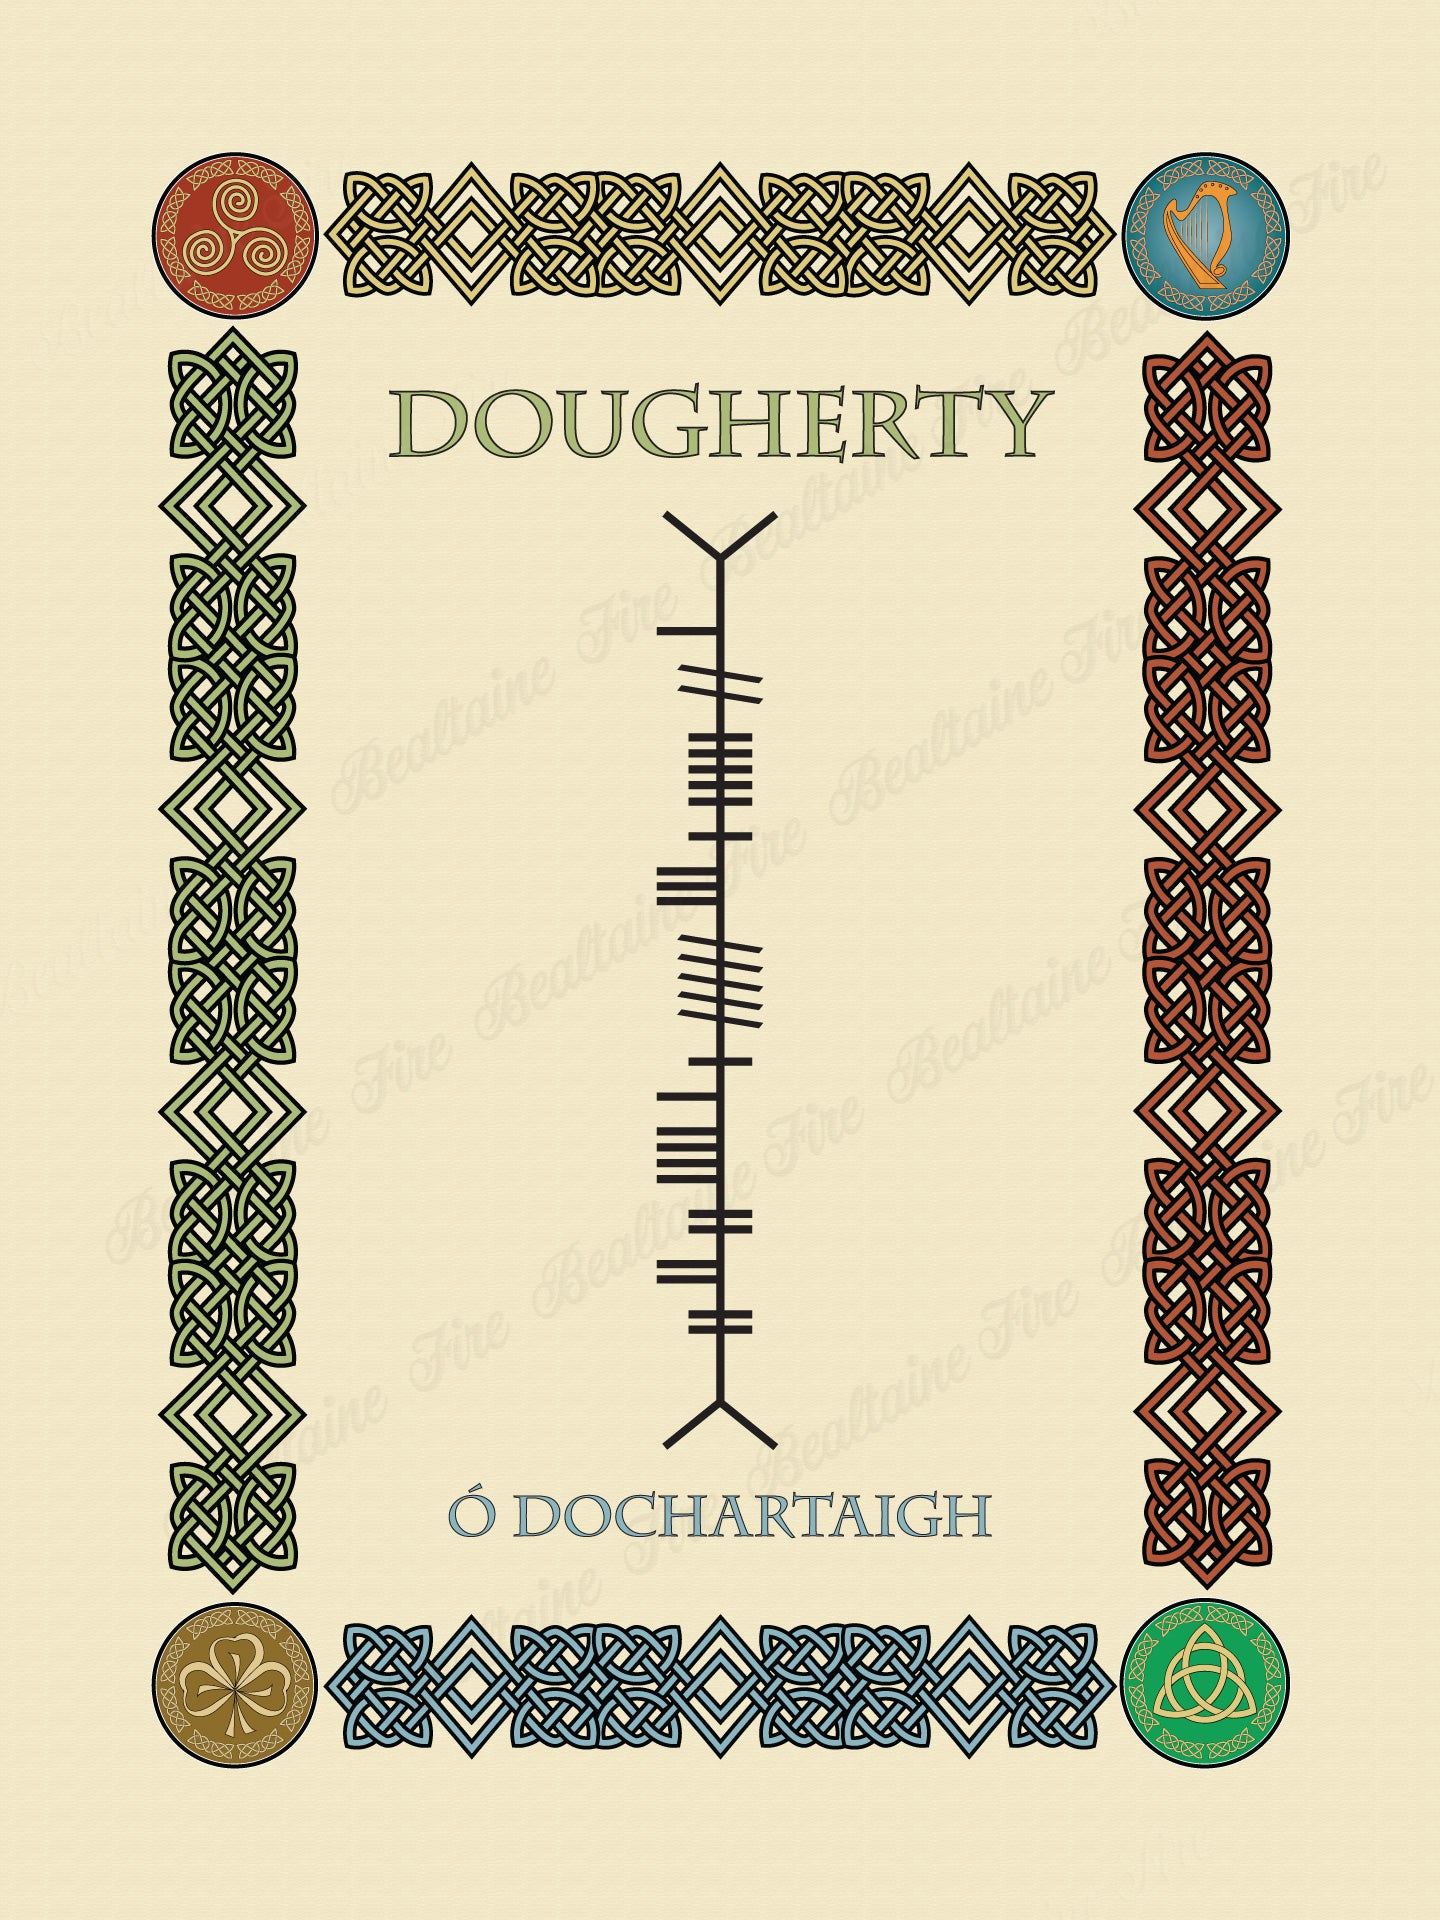 Dougherty in Old Irish and Ogham - PDF Download